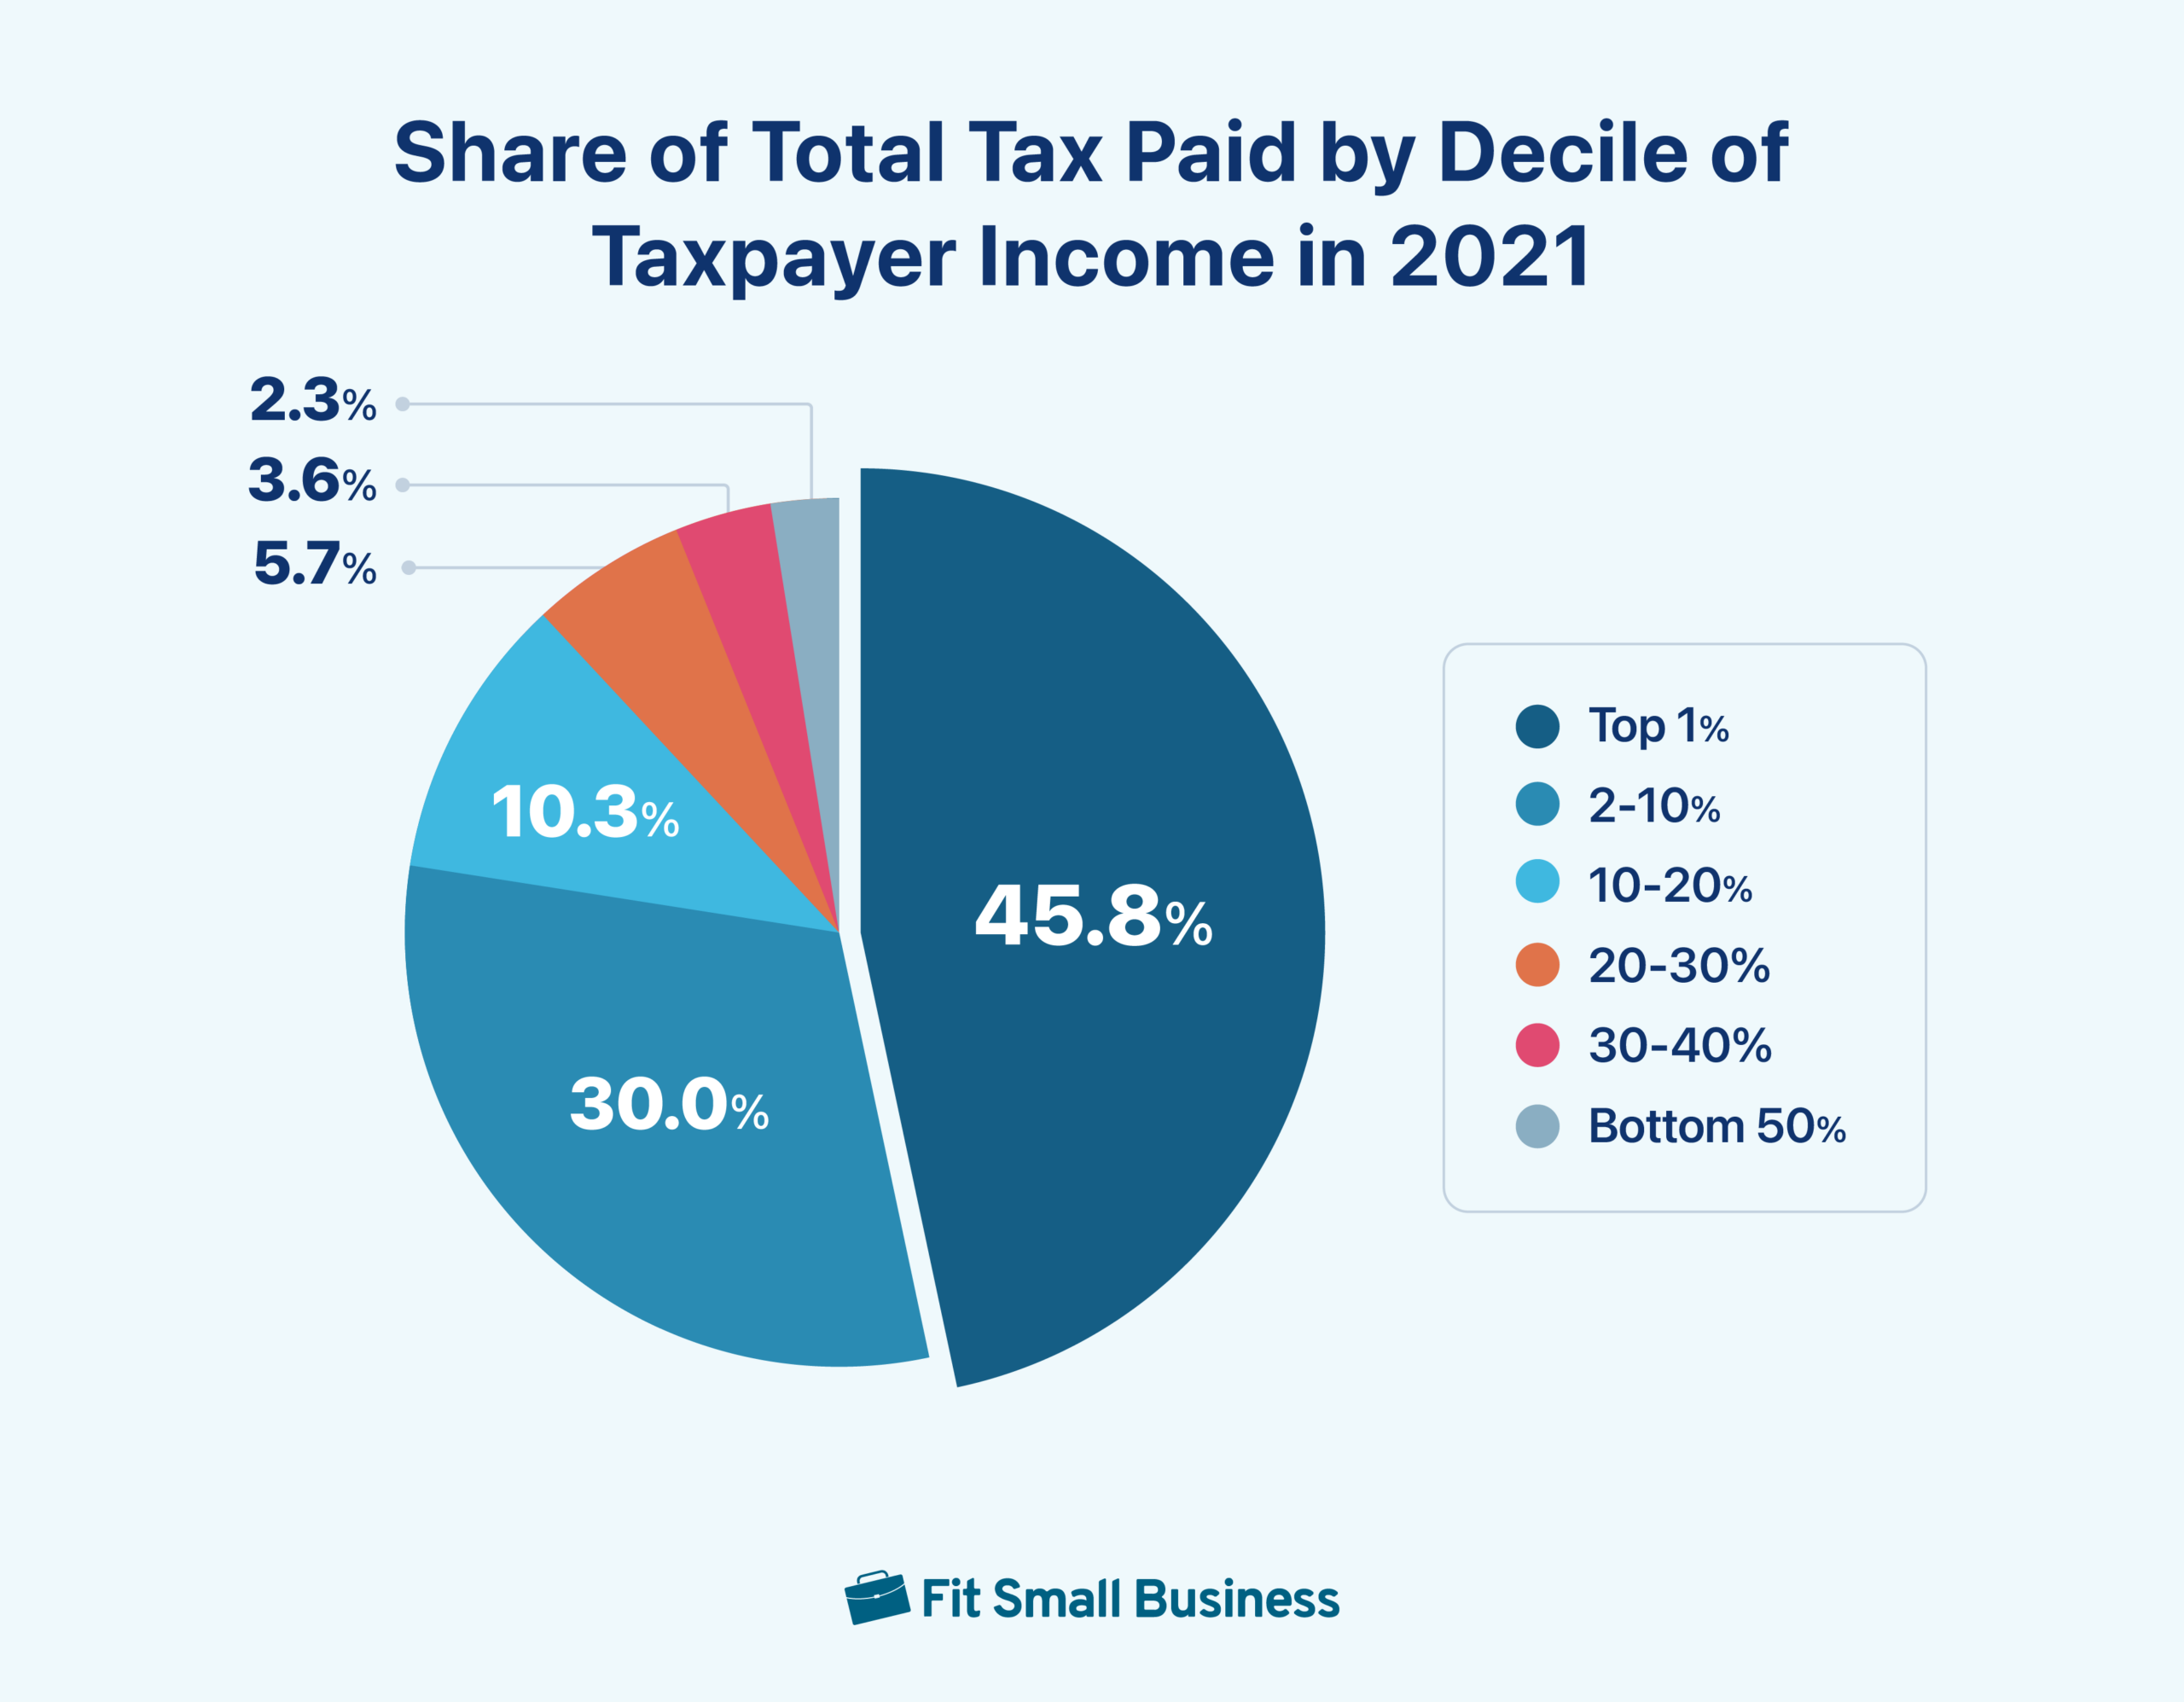 A pie chart visualizing the share of total tax paid by decile of taxpayer income in 2021.